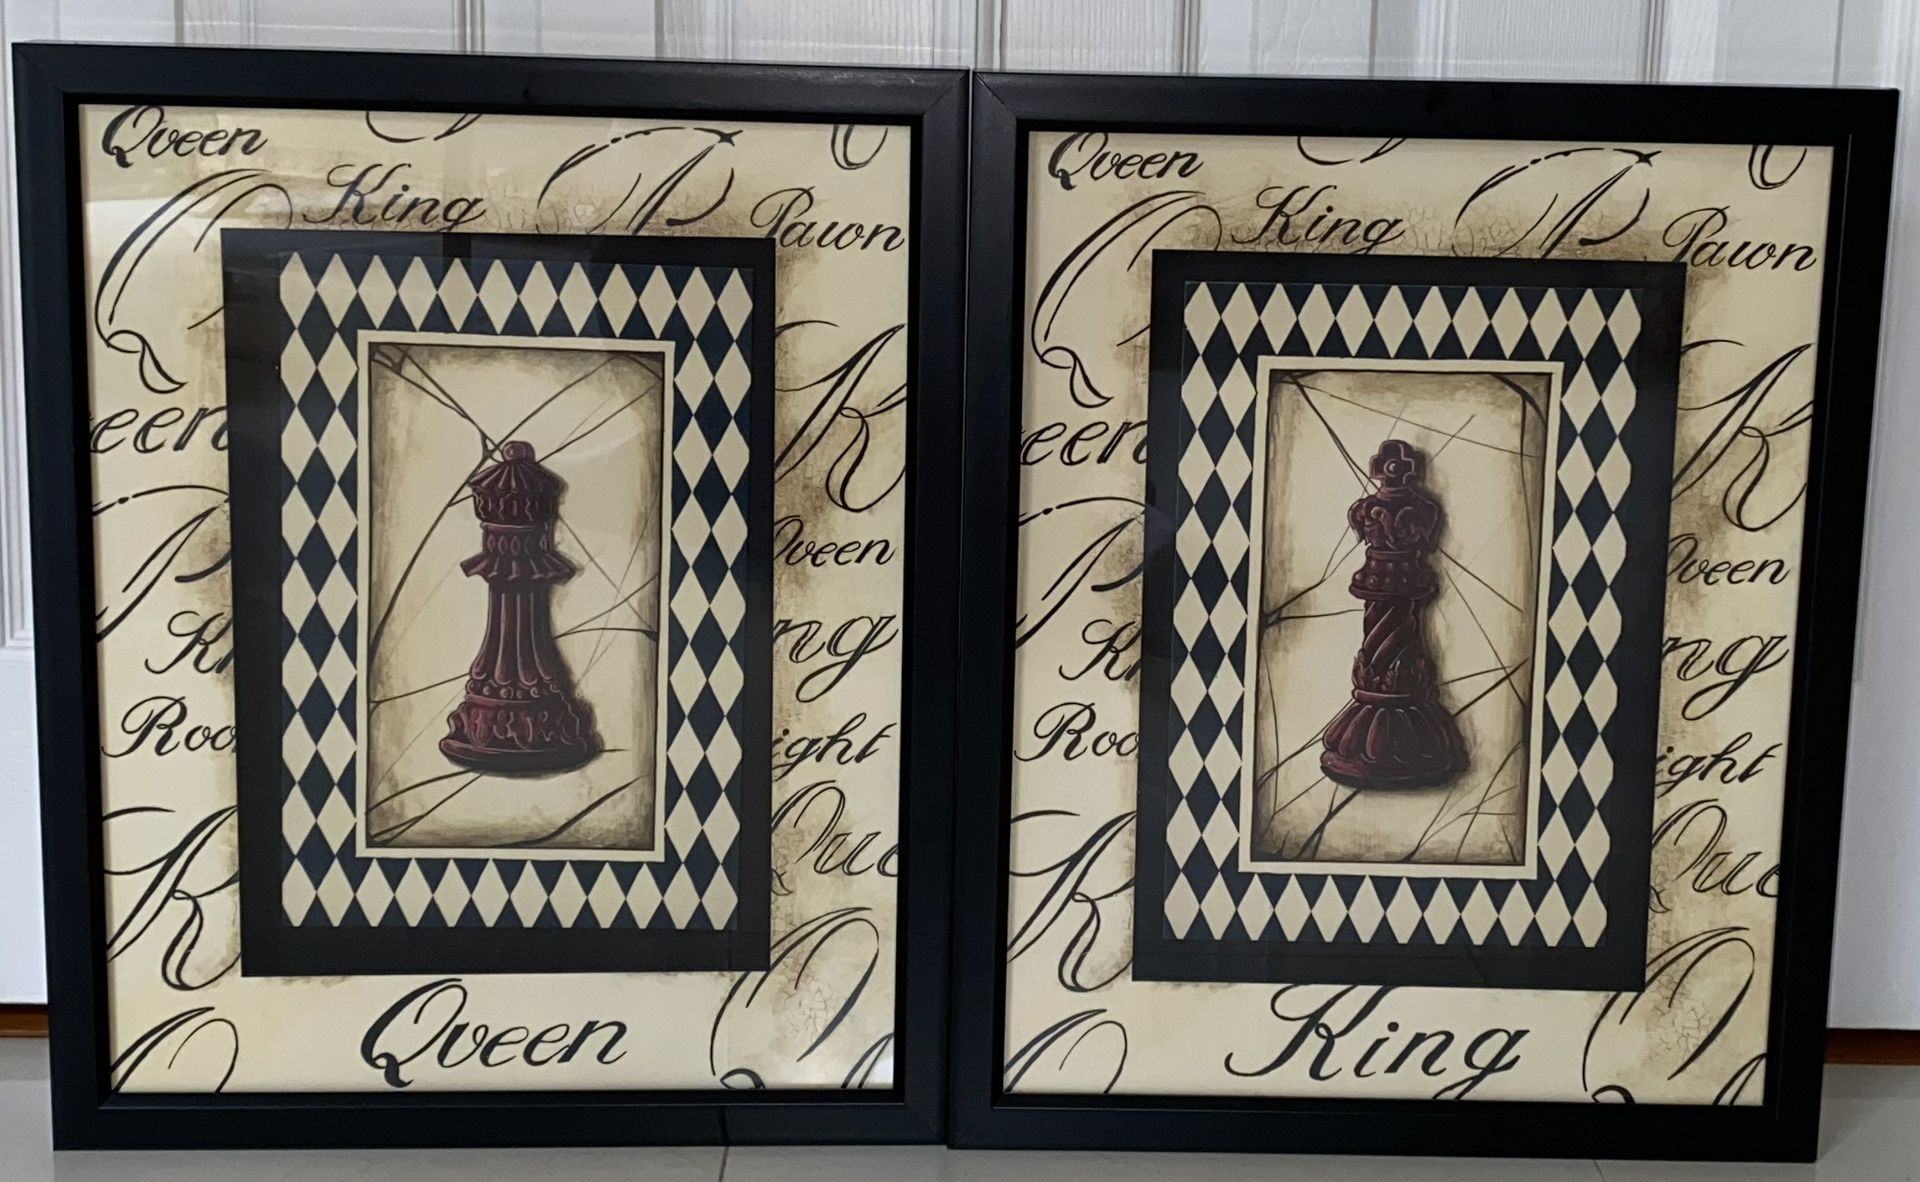 ART – QUEEN & KING QTY 2 BLACK FRAMED WALL HANGING ART PICTURES